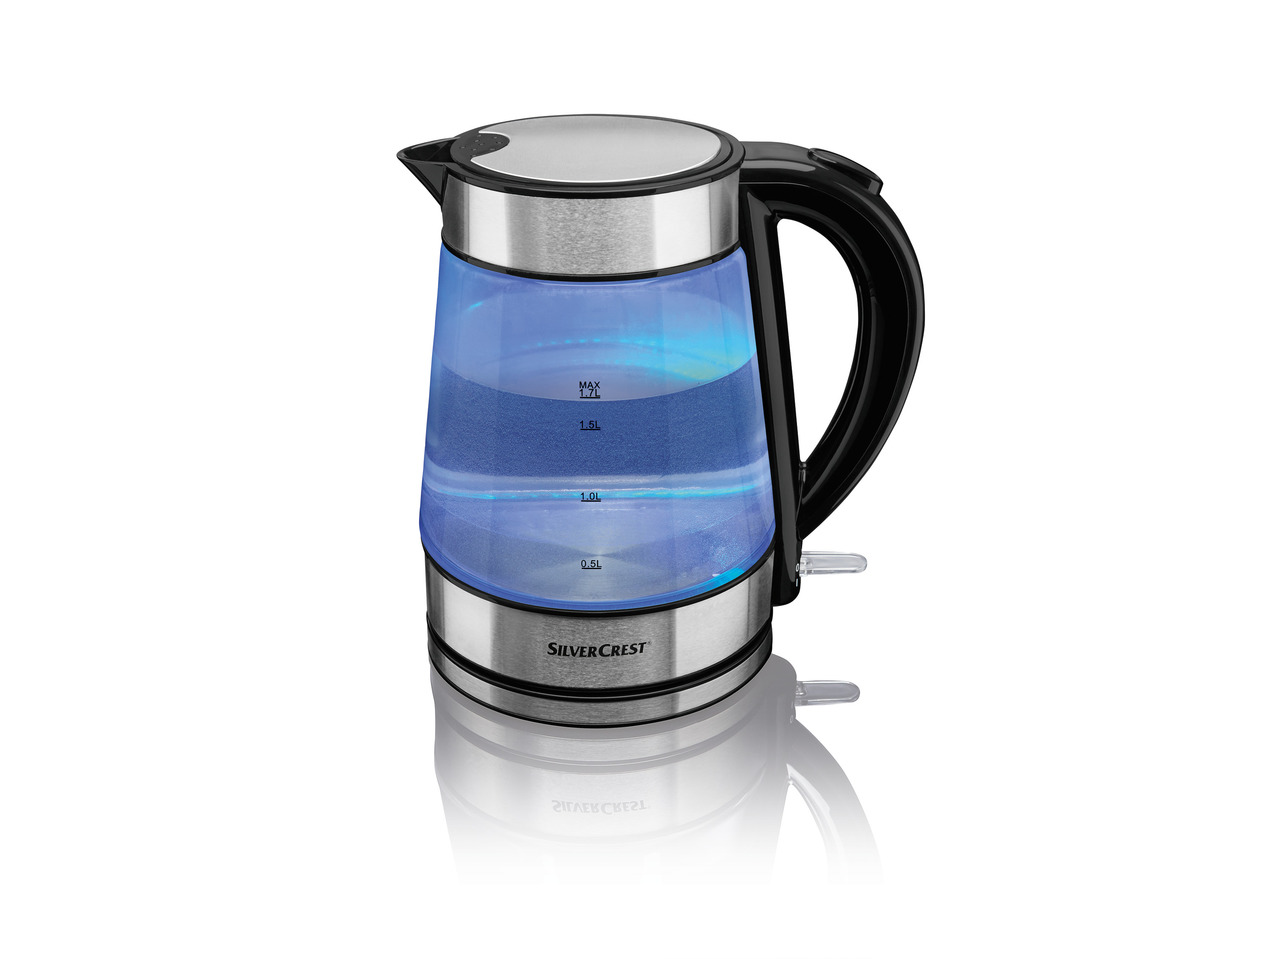 Glass electric Kettle with LED light